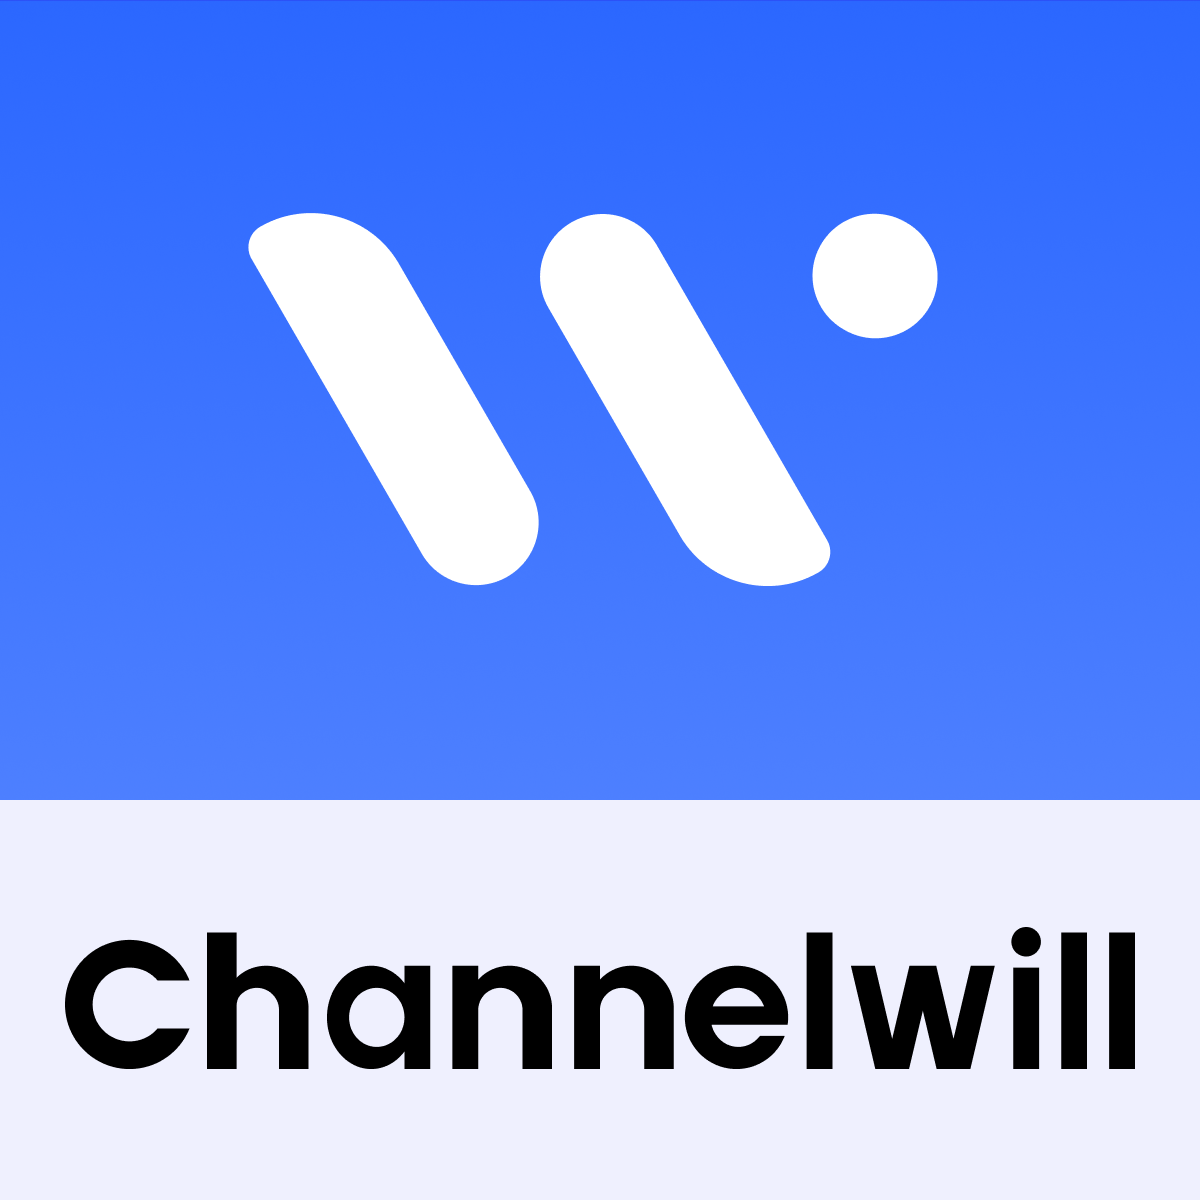 Channelwill